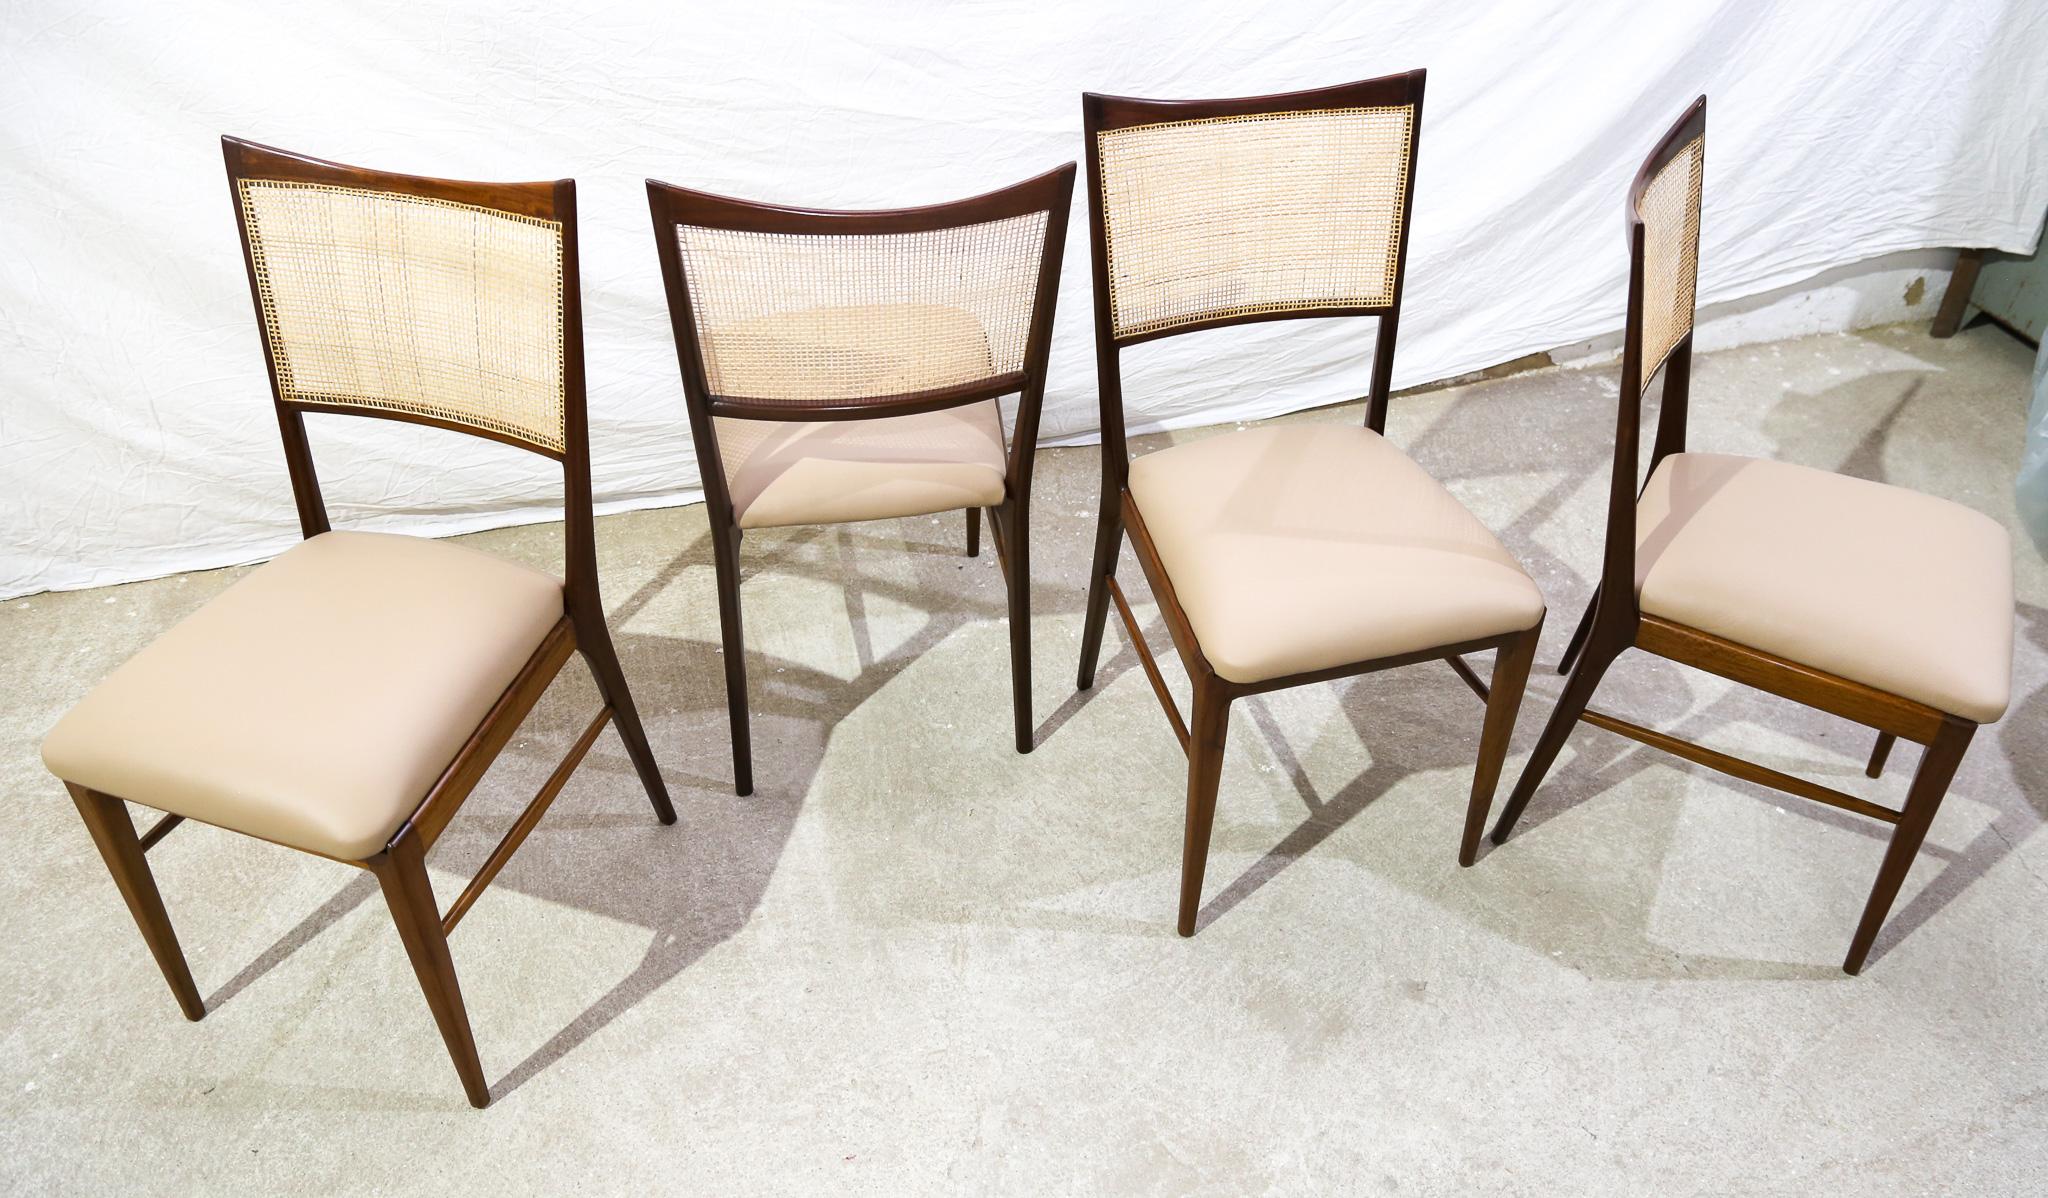 Brazilian Modern Set of Four Chairs in Hardwood & Beige Leather, Unknown, 1960s For Sale 4